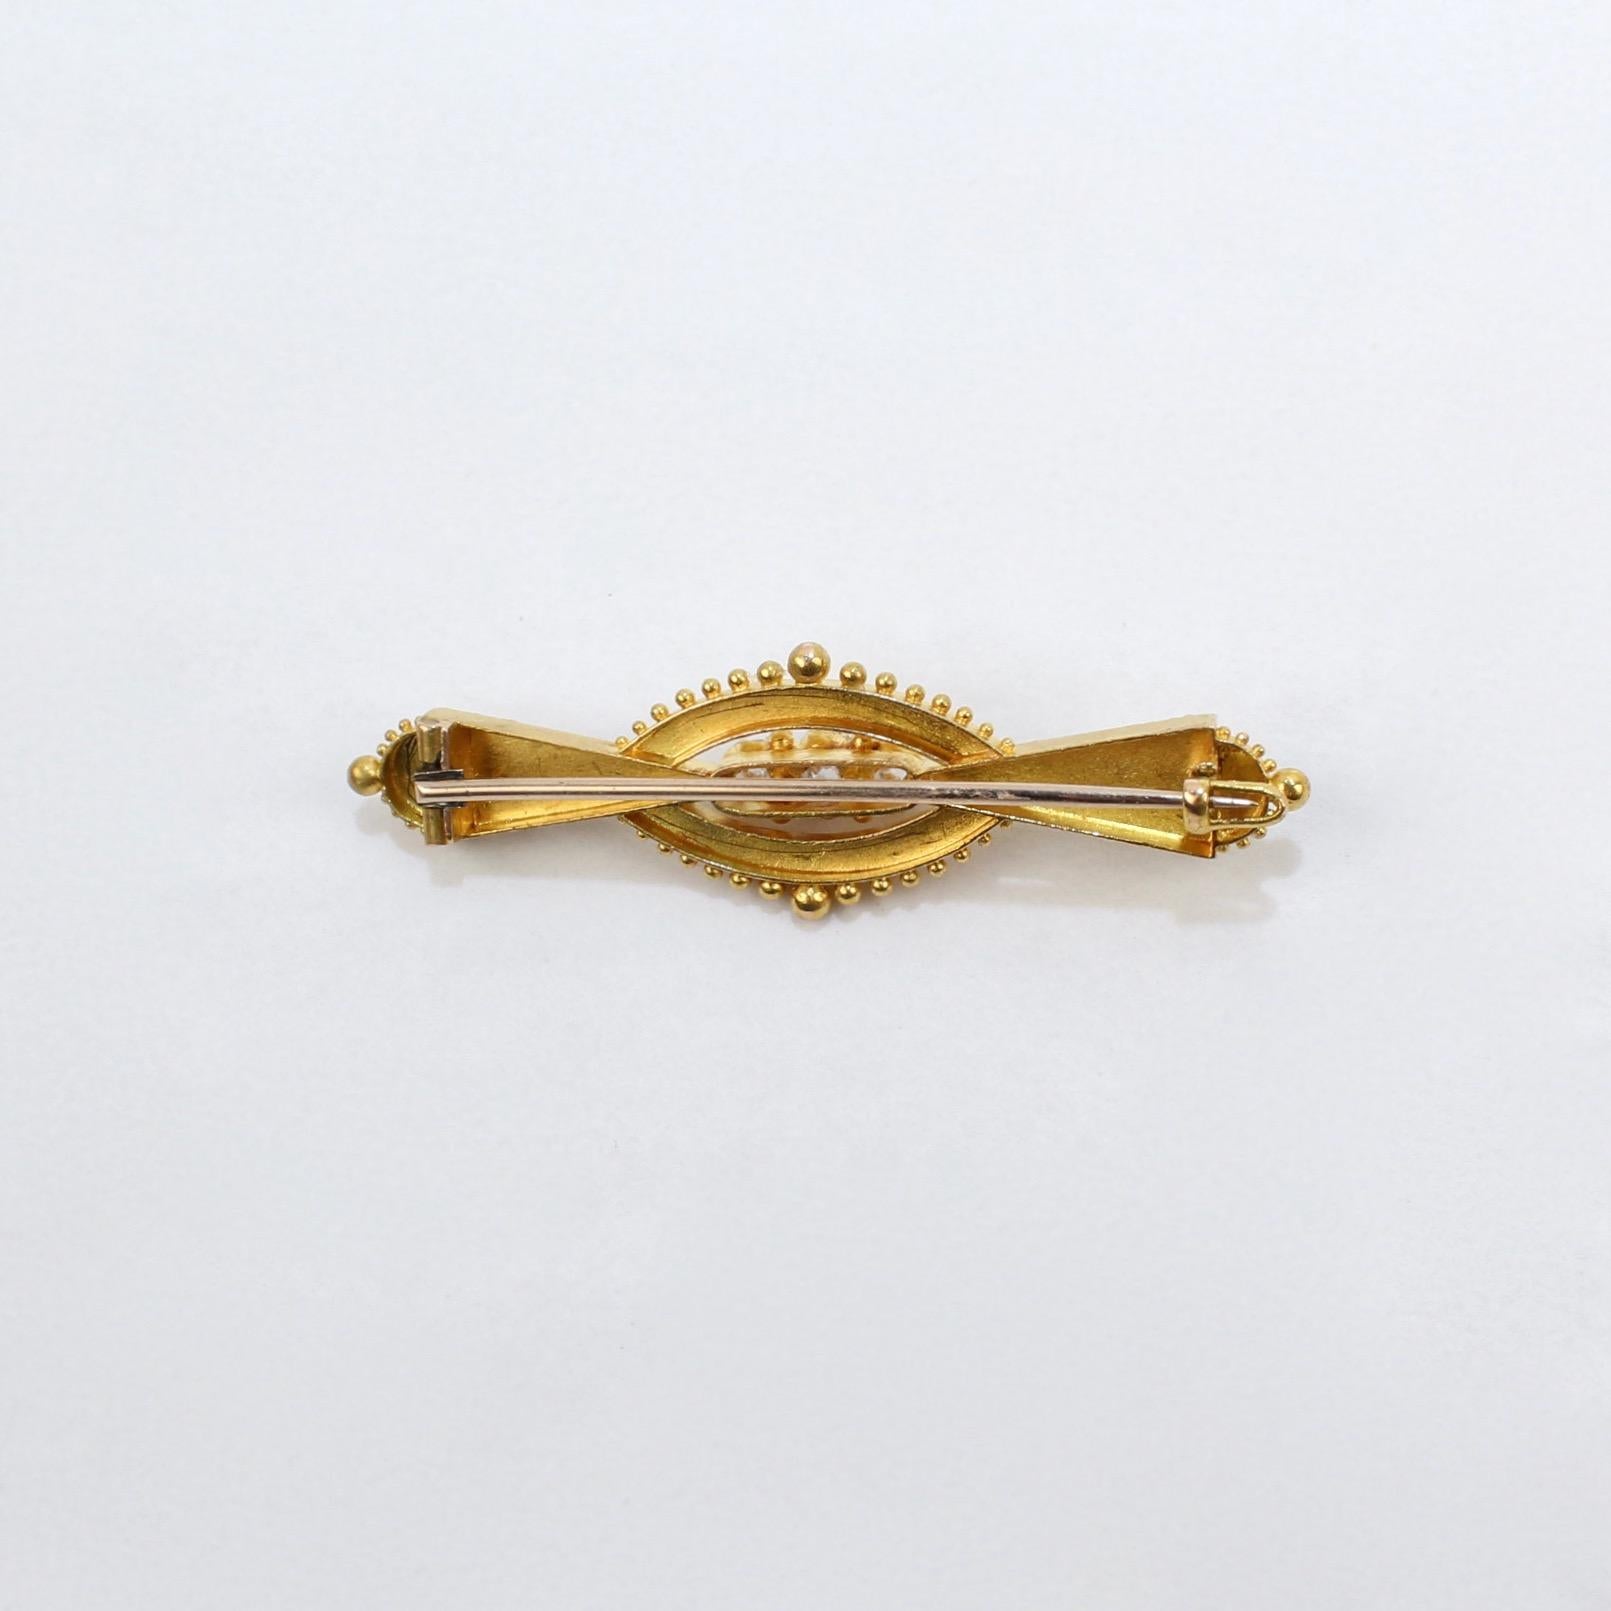 Women's Antique Victorian Etruscan Revival 14 Karat Gold and Diamond Brooch or Pin For Sale